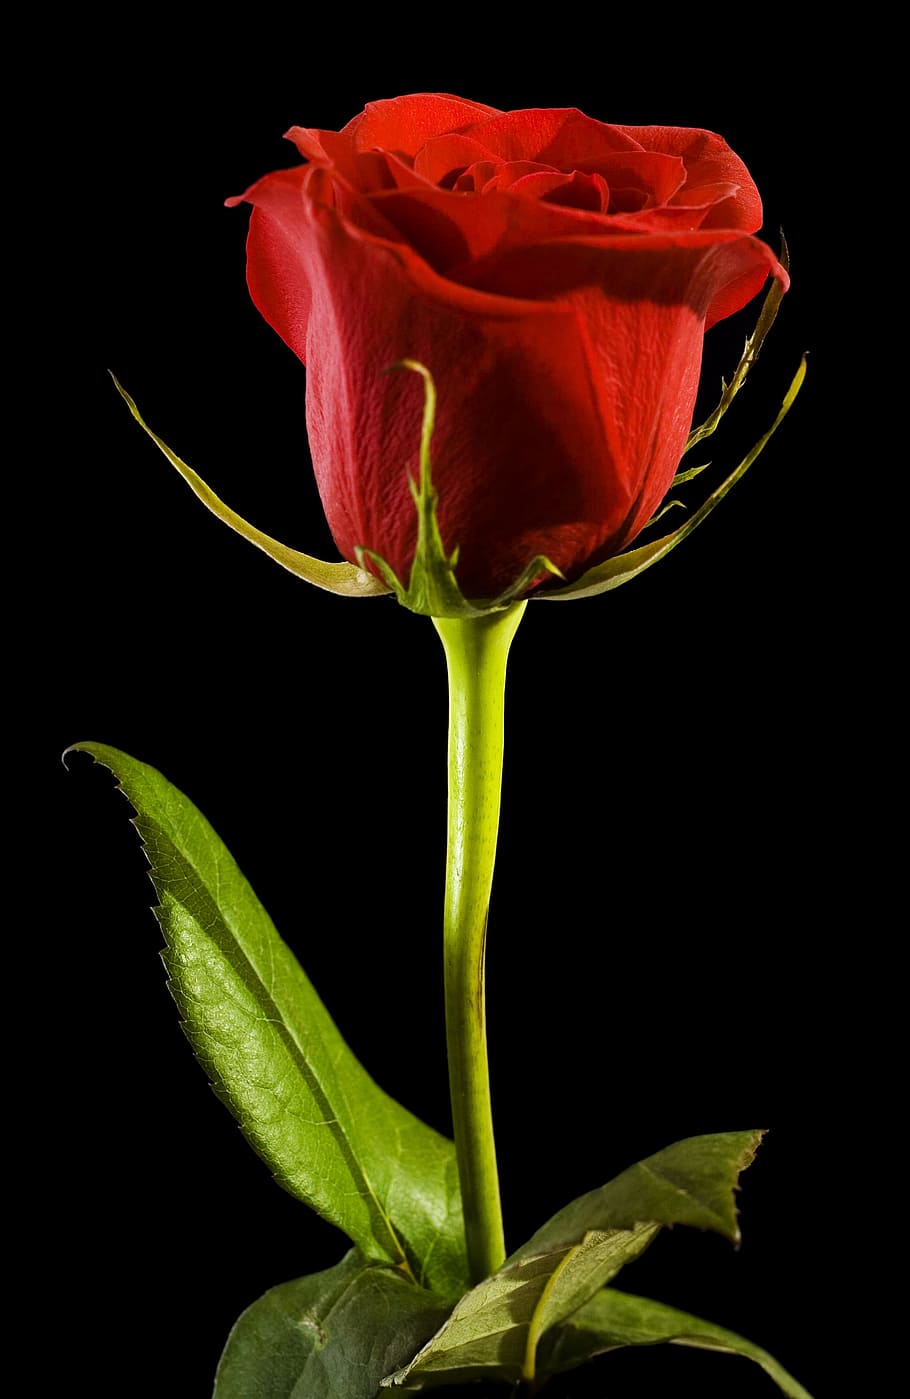 black, rose, red, background, closeup, isolated, nobody, petal, day, flower